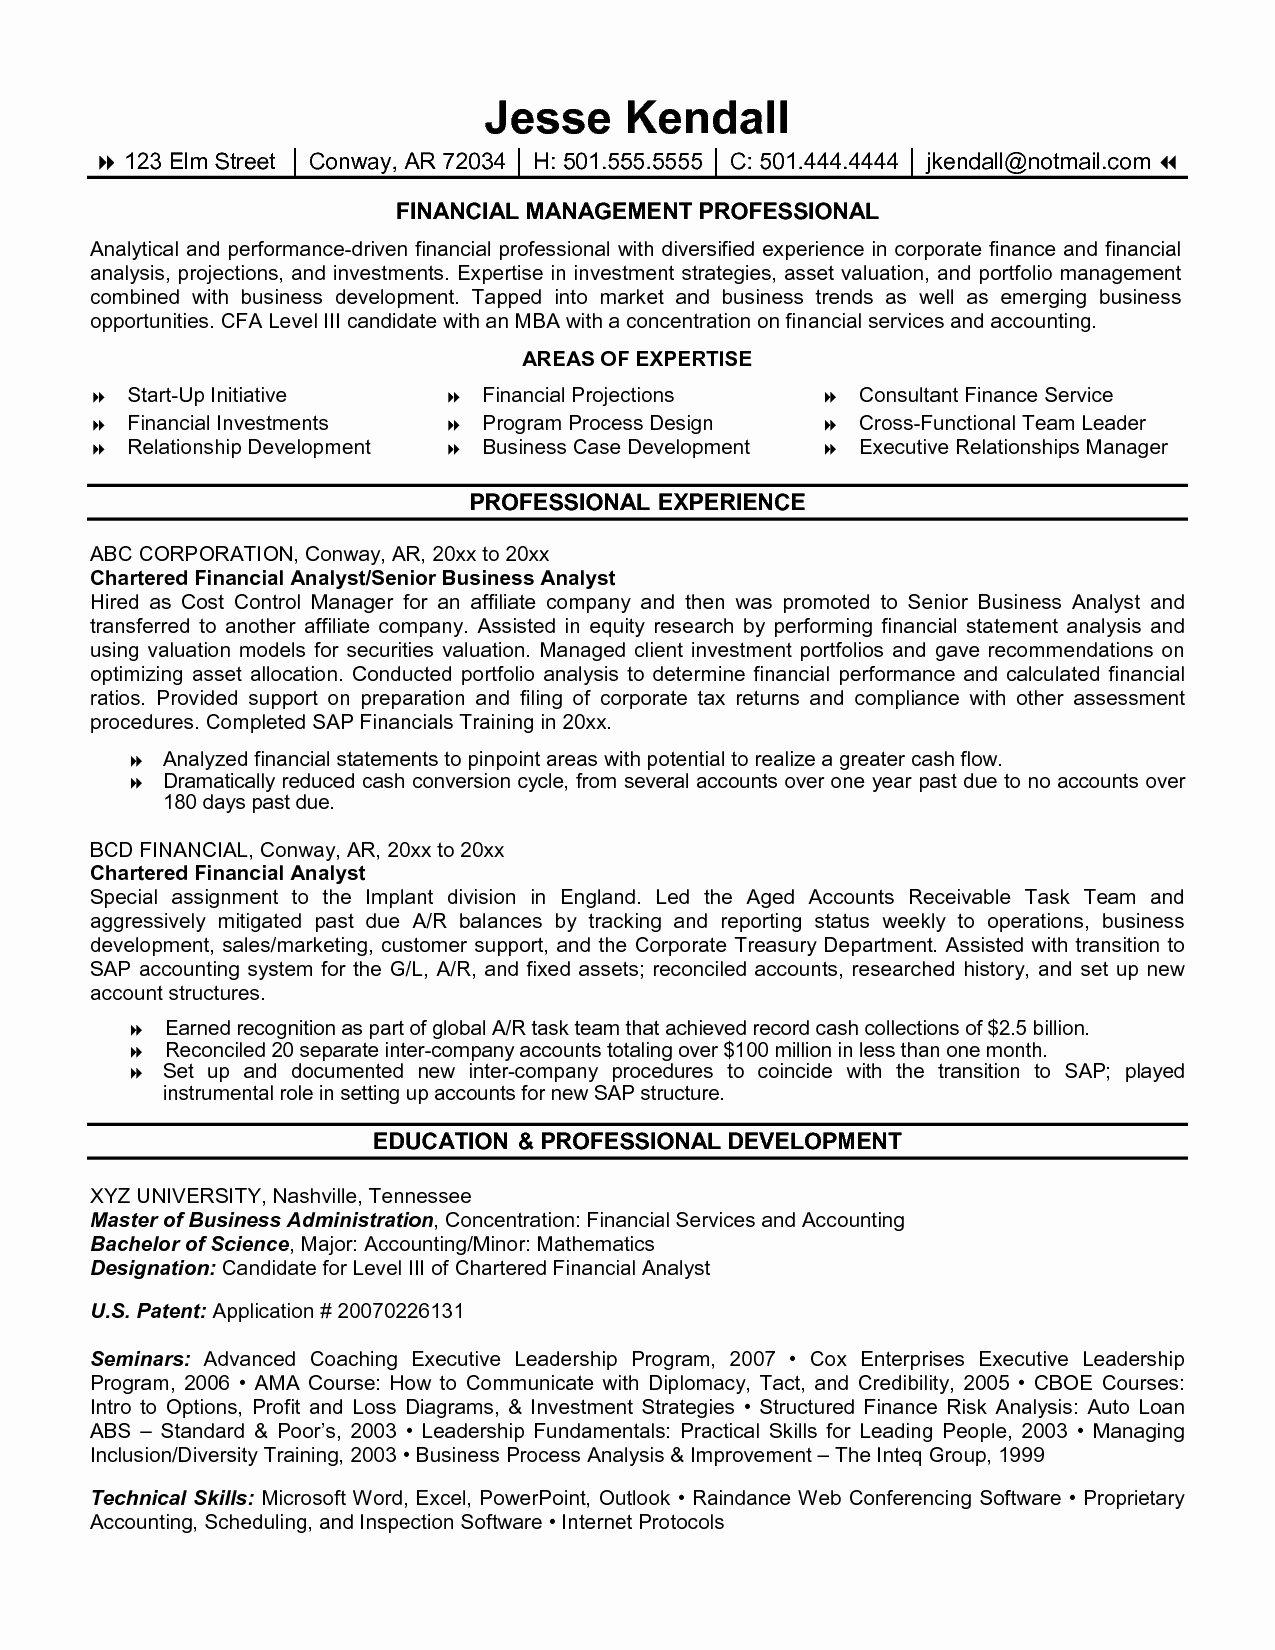 Resume format 2016 2017for Marketing Manager